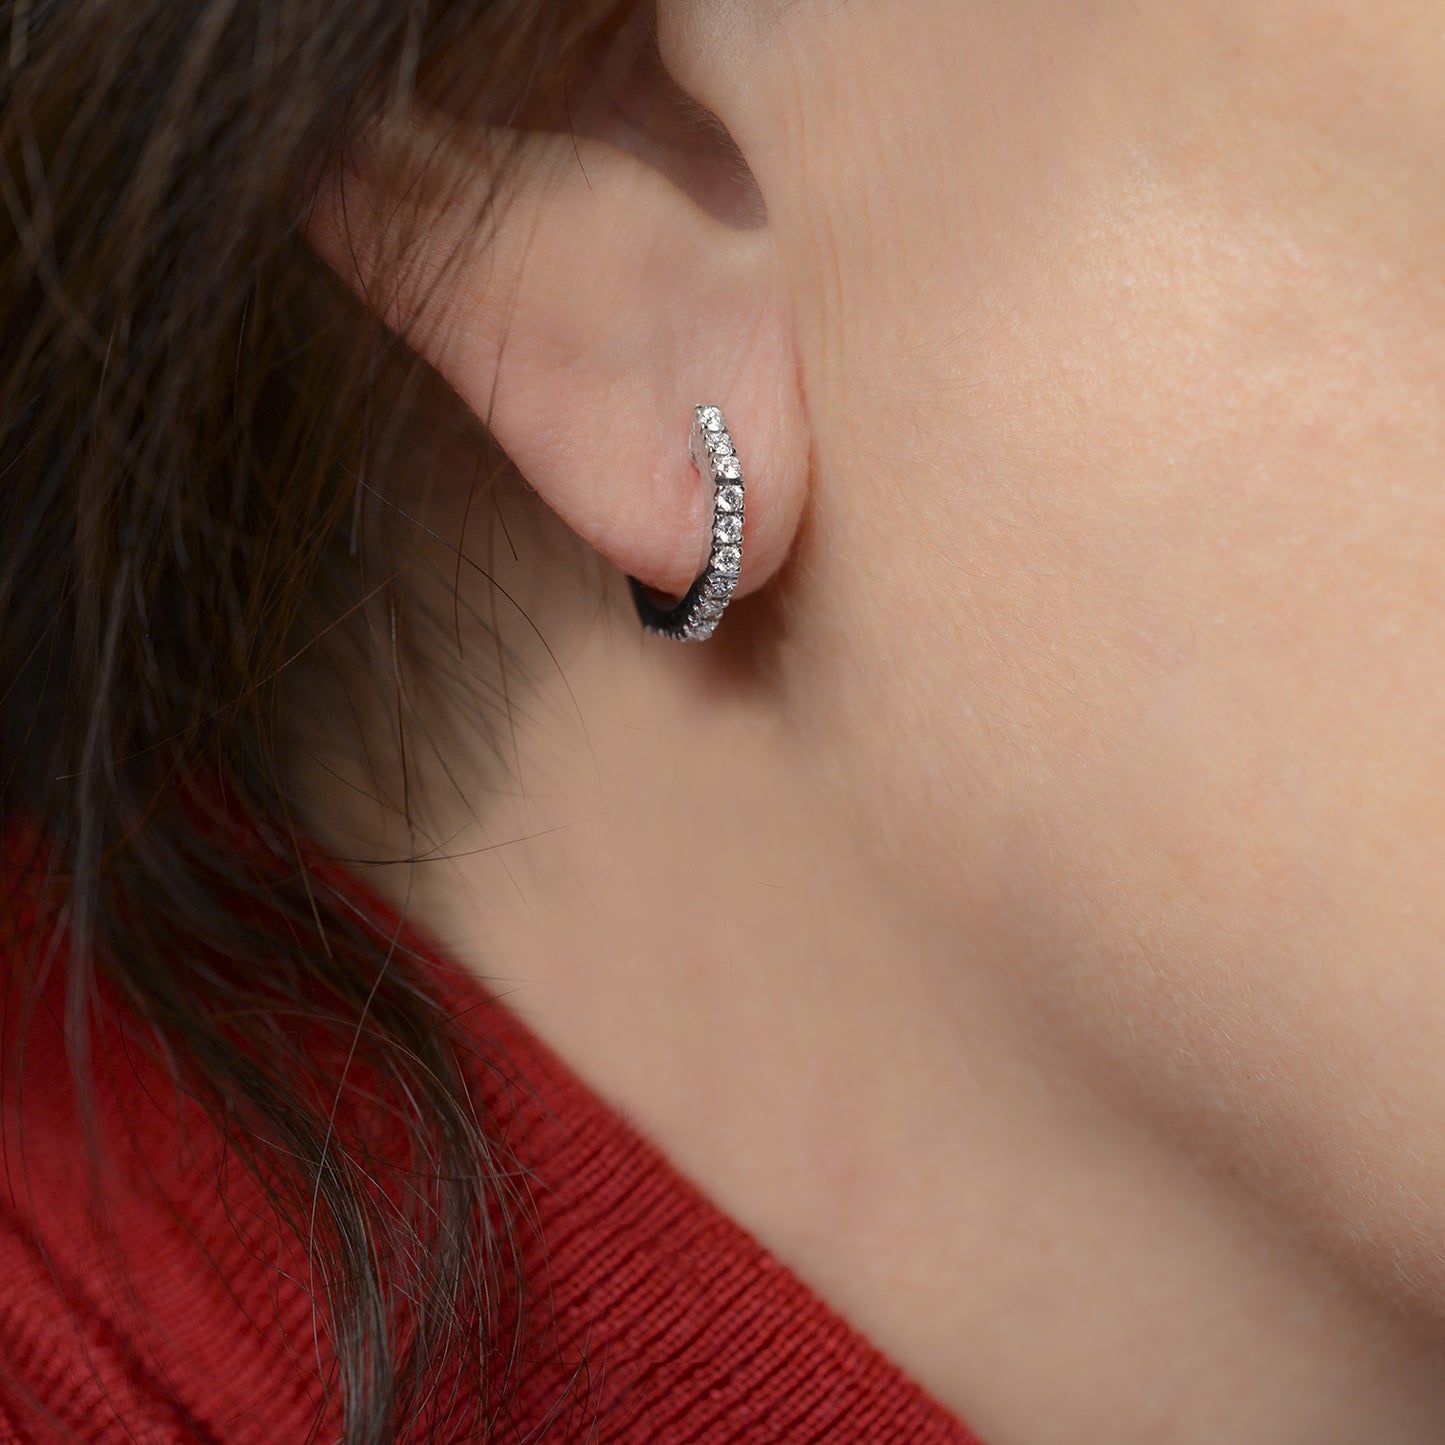 Octagon ear hoop earrings in white gold and diamonds